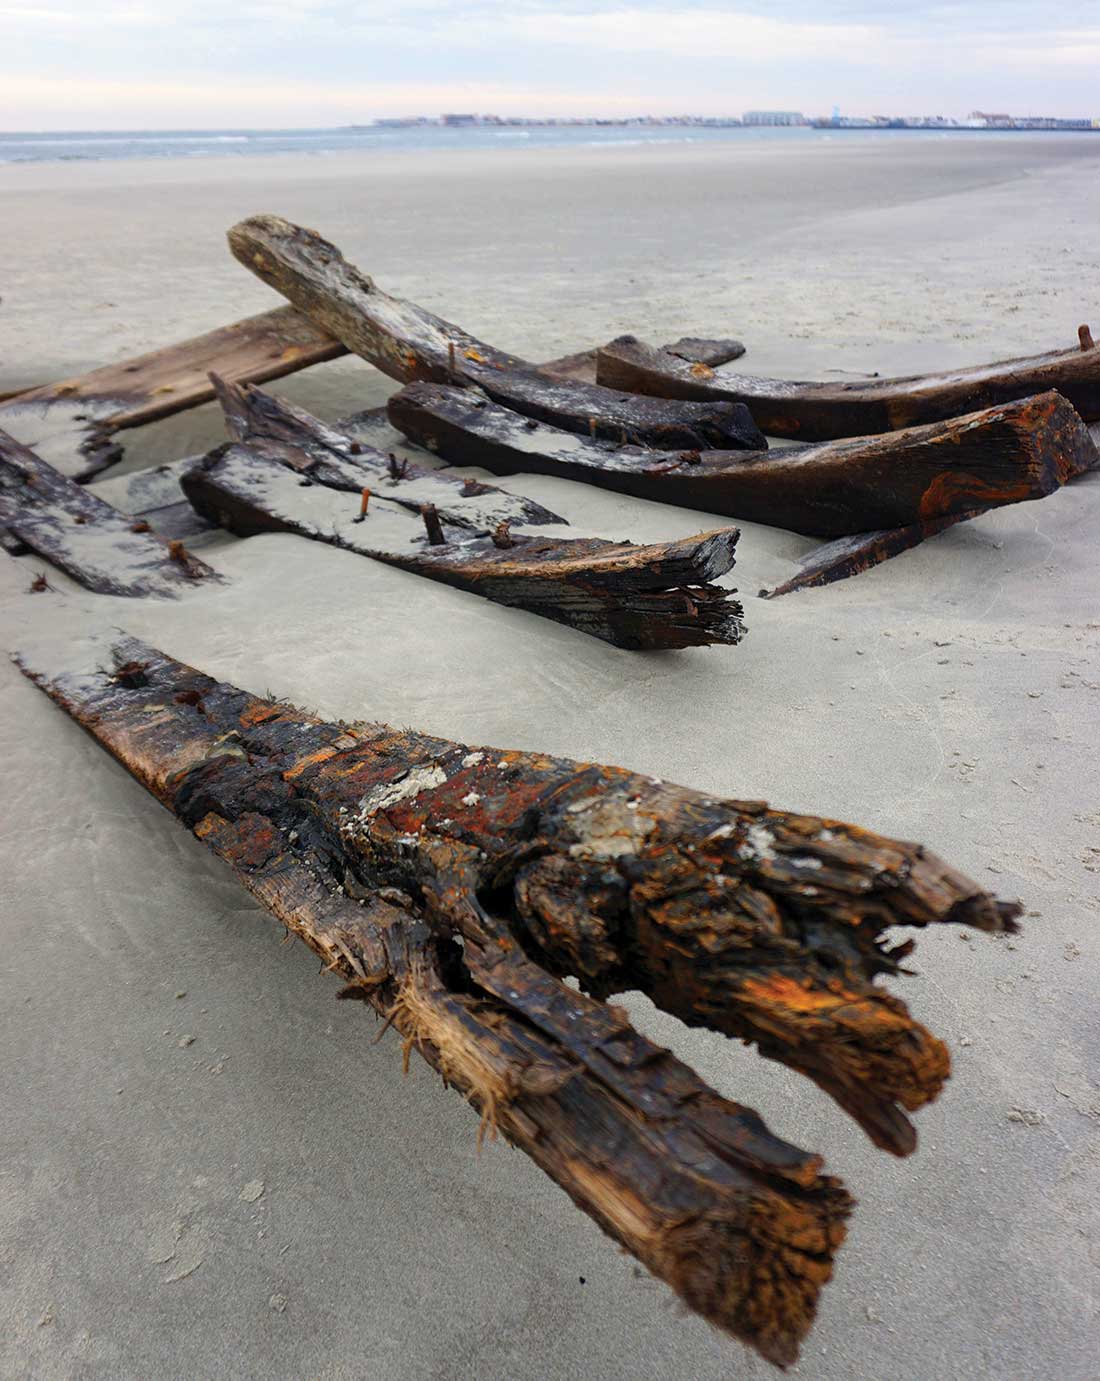 Cape May county waters hold plenty of historic secrets, which occasionally become visible to the naked eye, as was the case in 2018 when what was believed to be the wreck of the DH Ingraham appeared along the beach at Wildwood. 